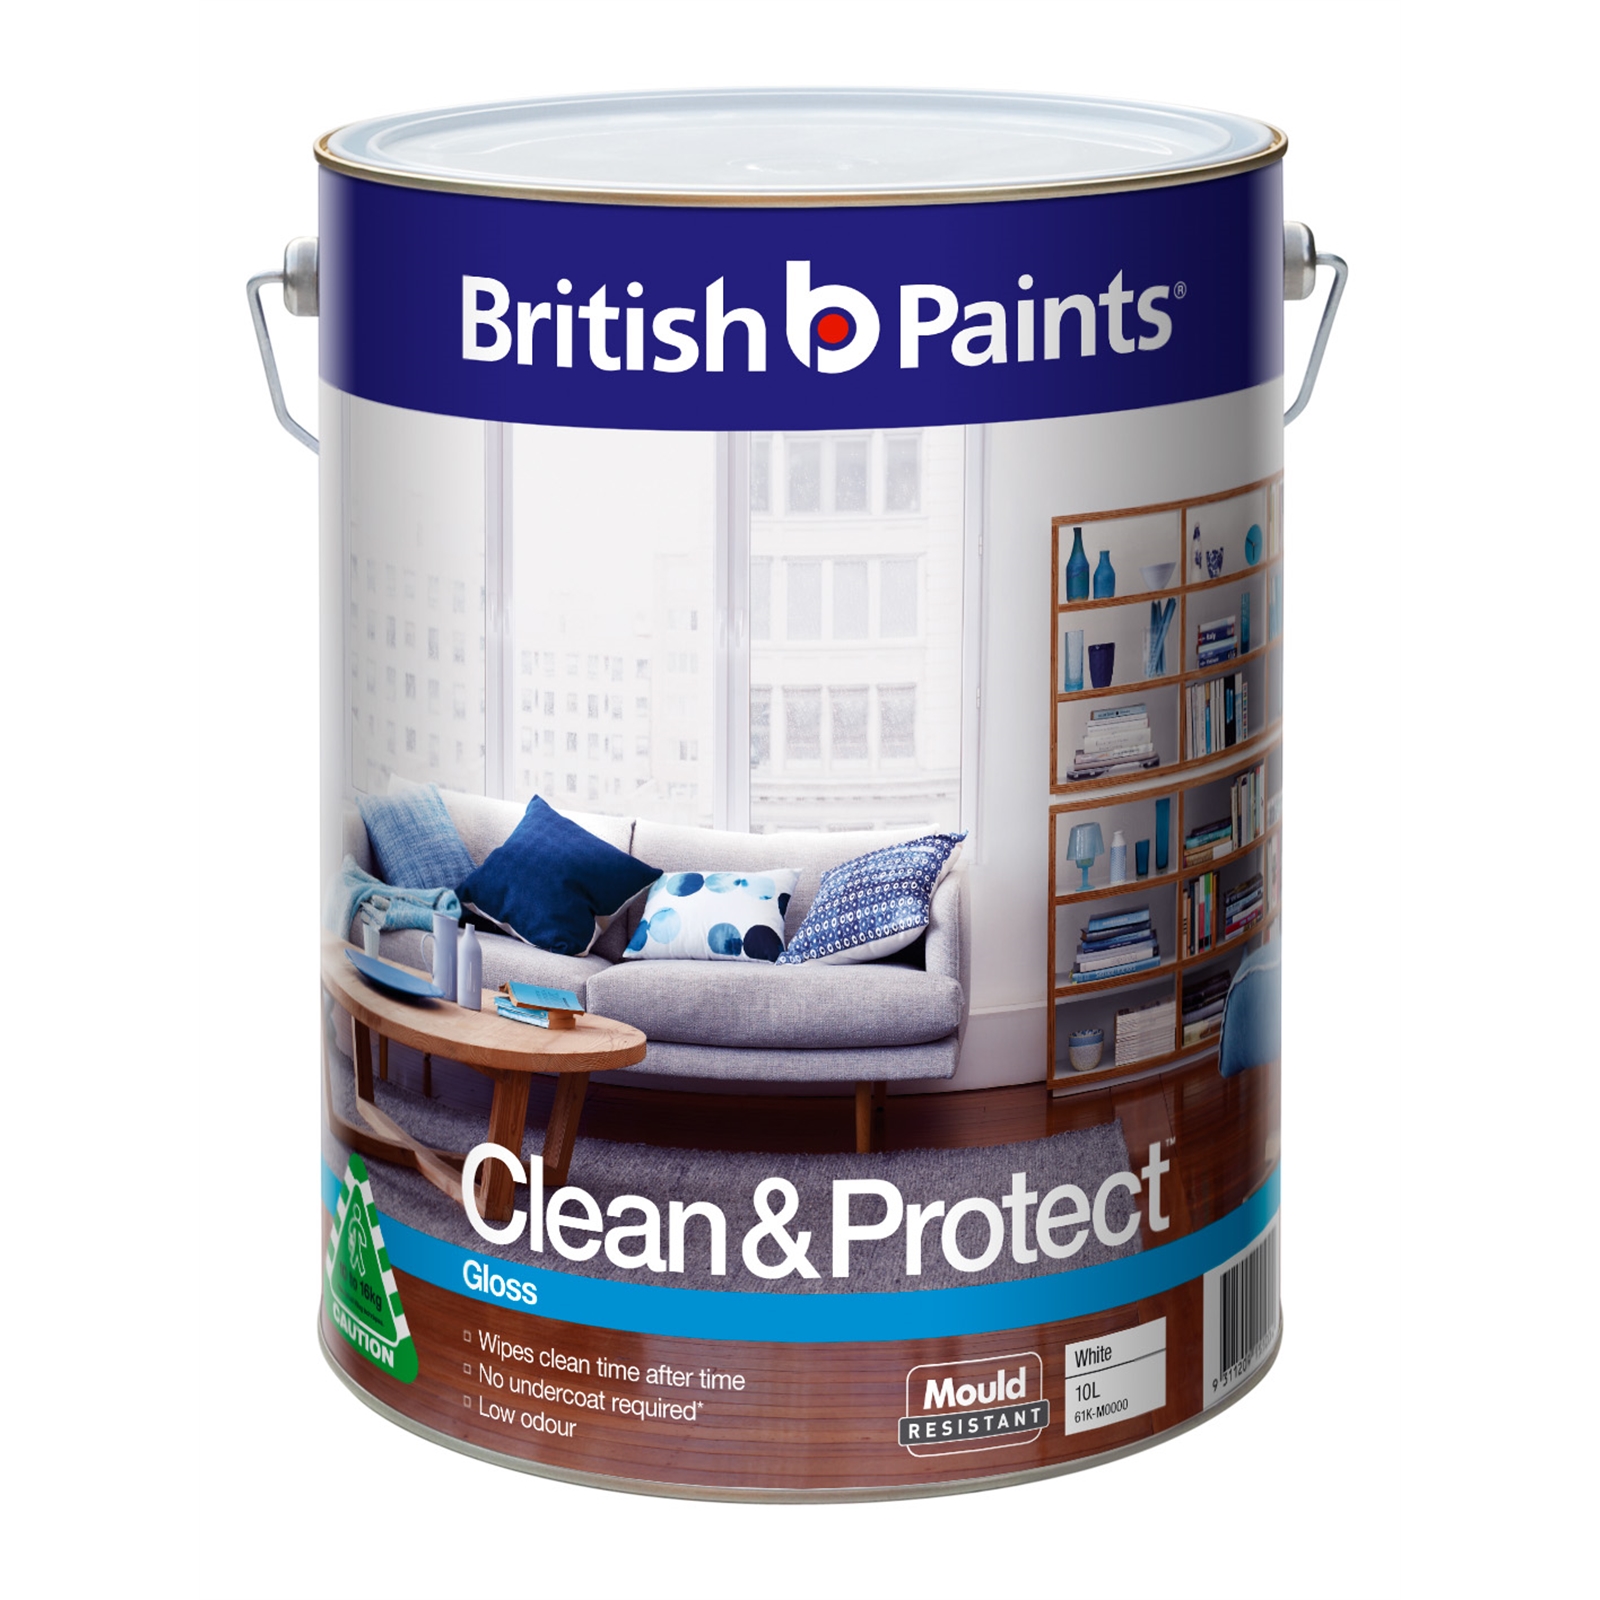 British Paints 10L Clean & Protect Gloss White Interior Paint